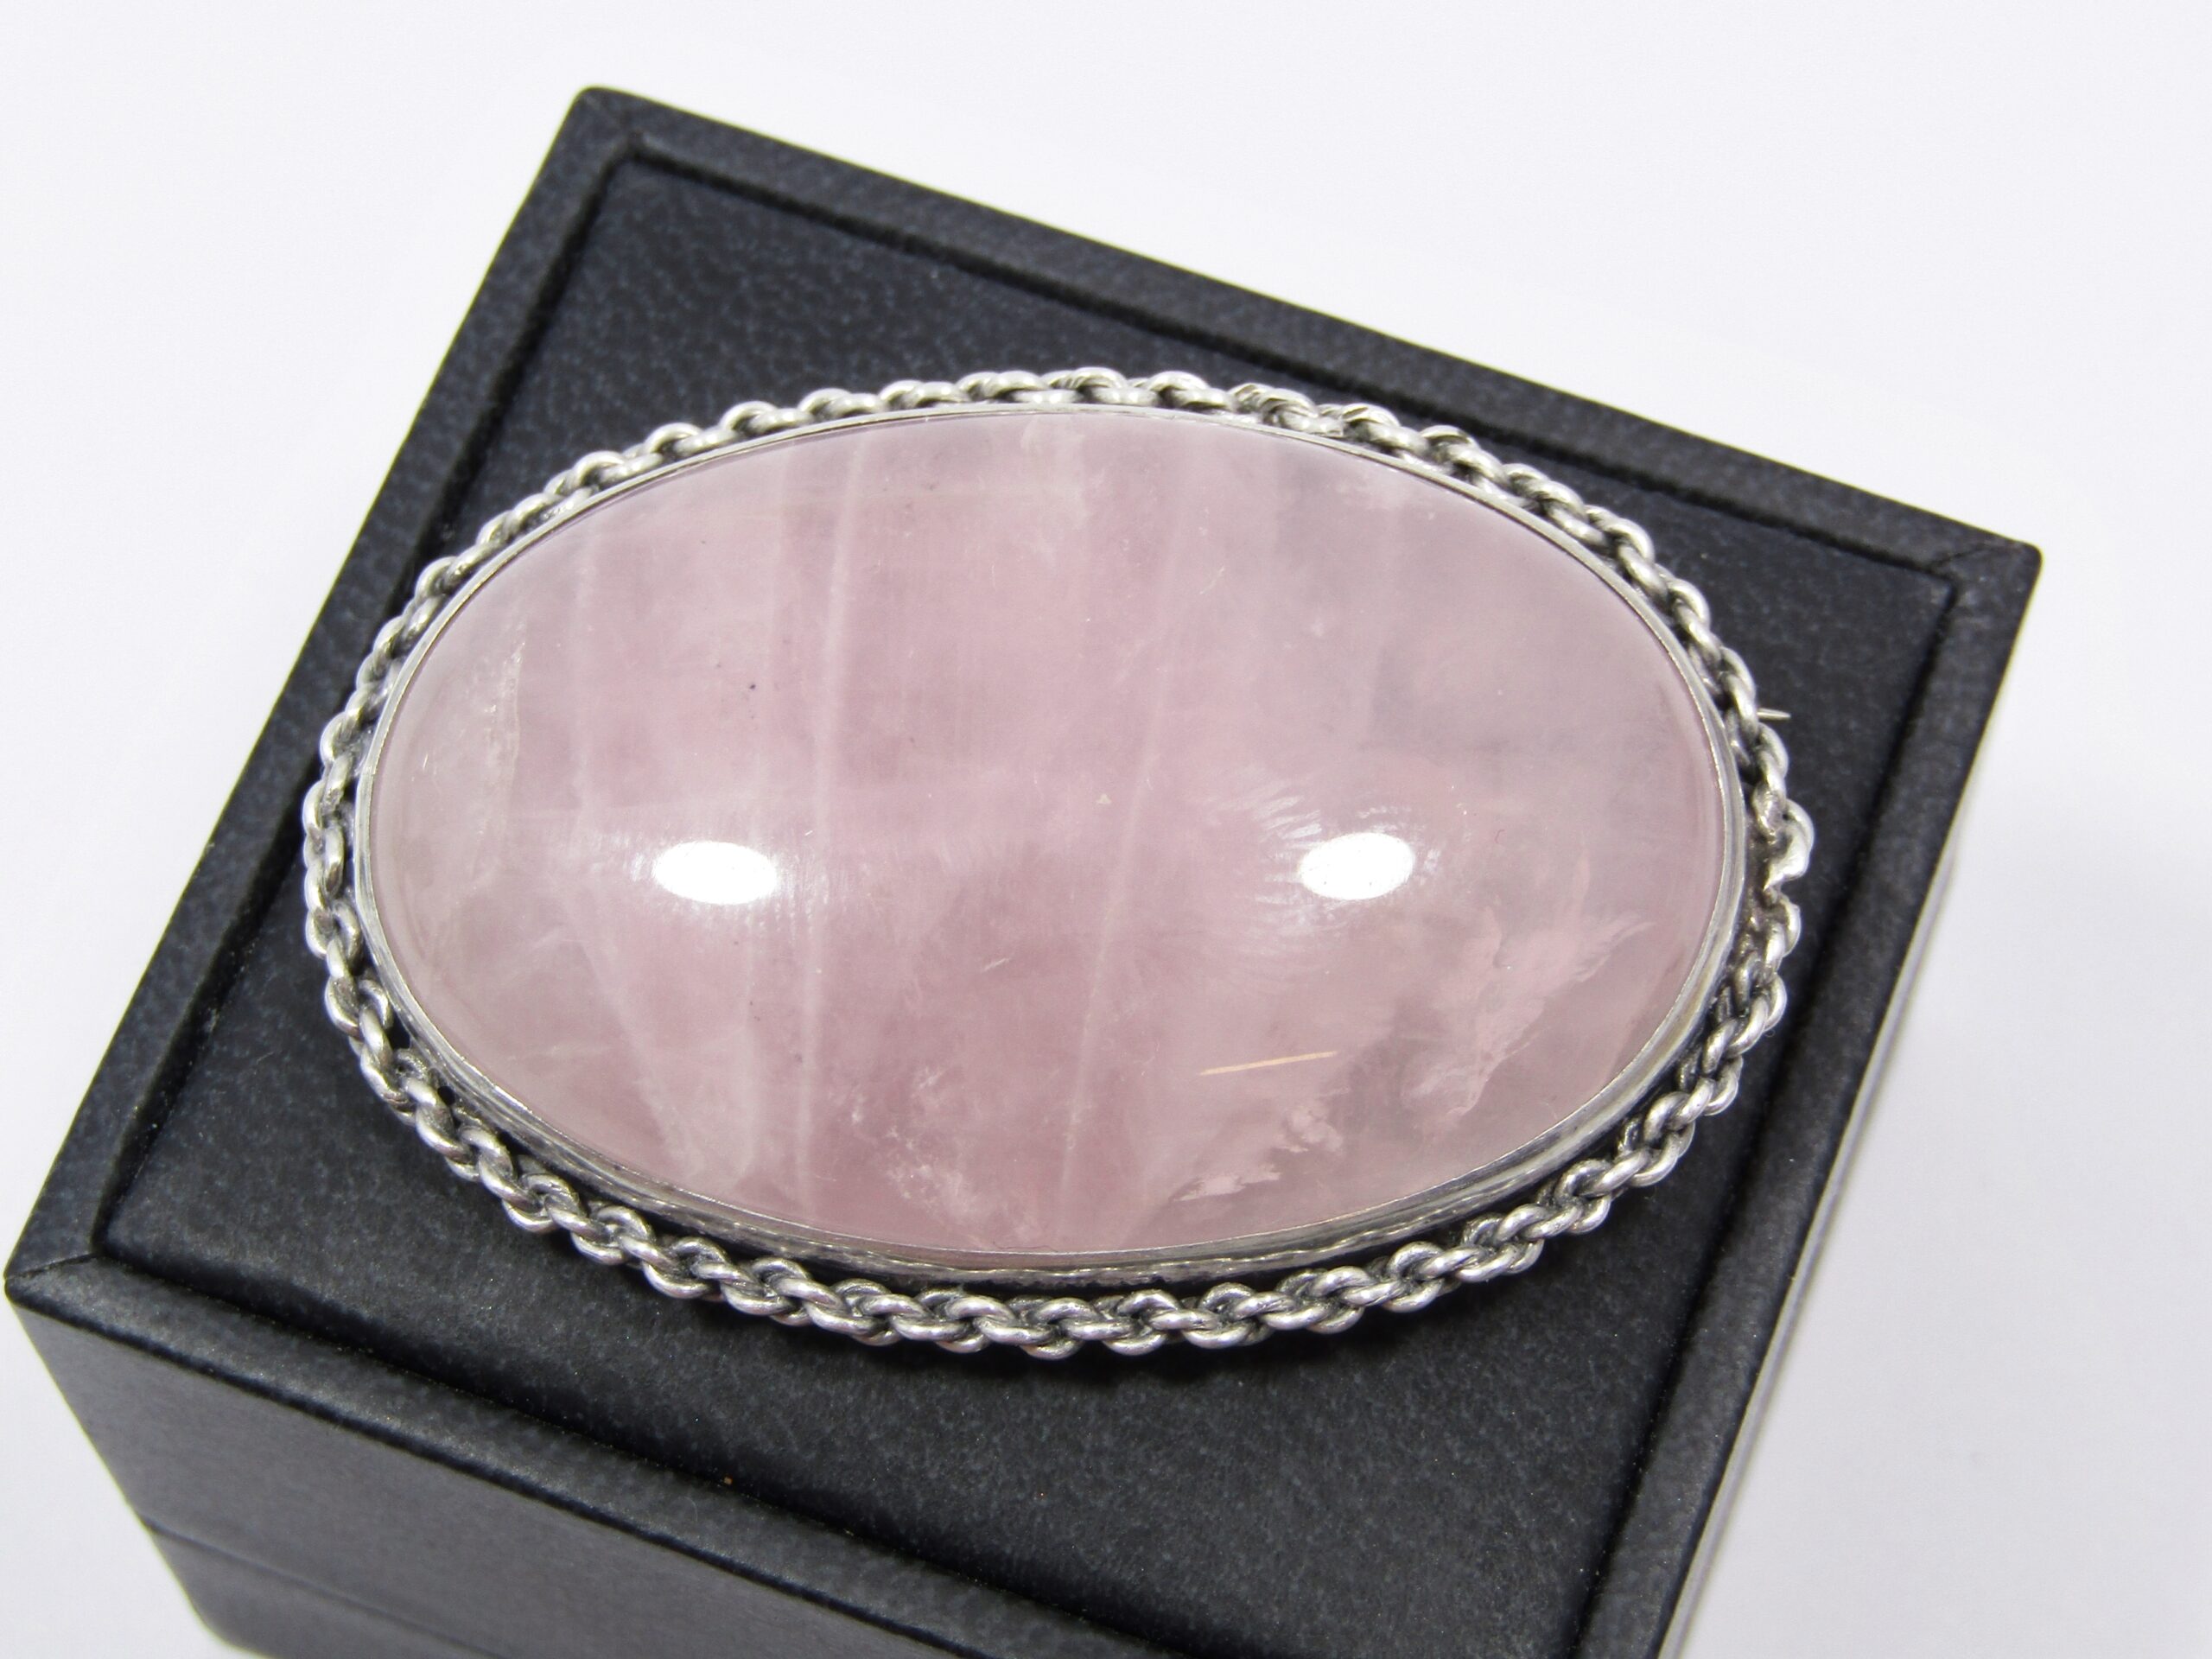 A Gorgeous Large Rose Quartz Pendant/Brooch in Sterling Silver